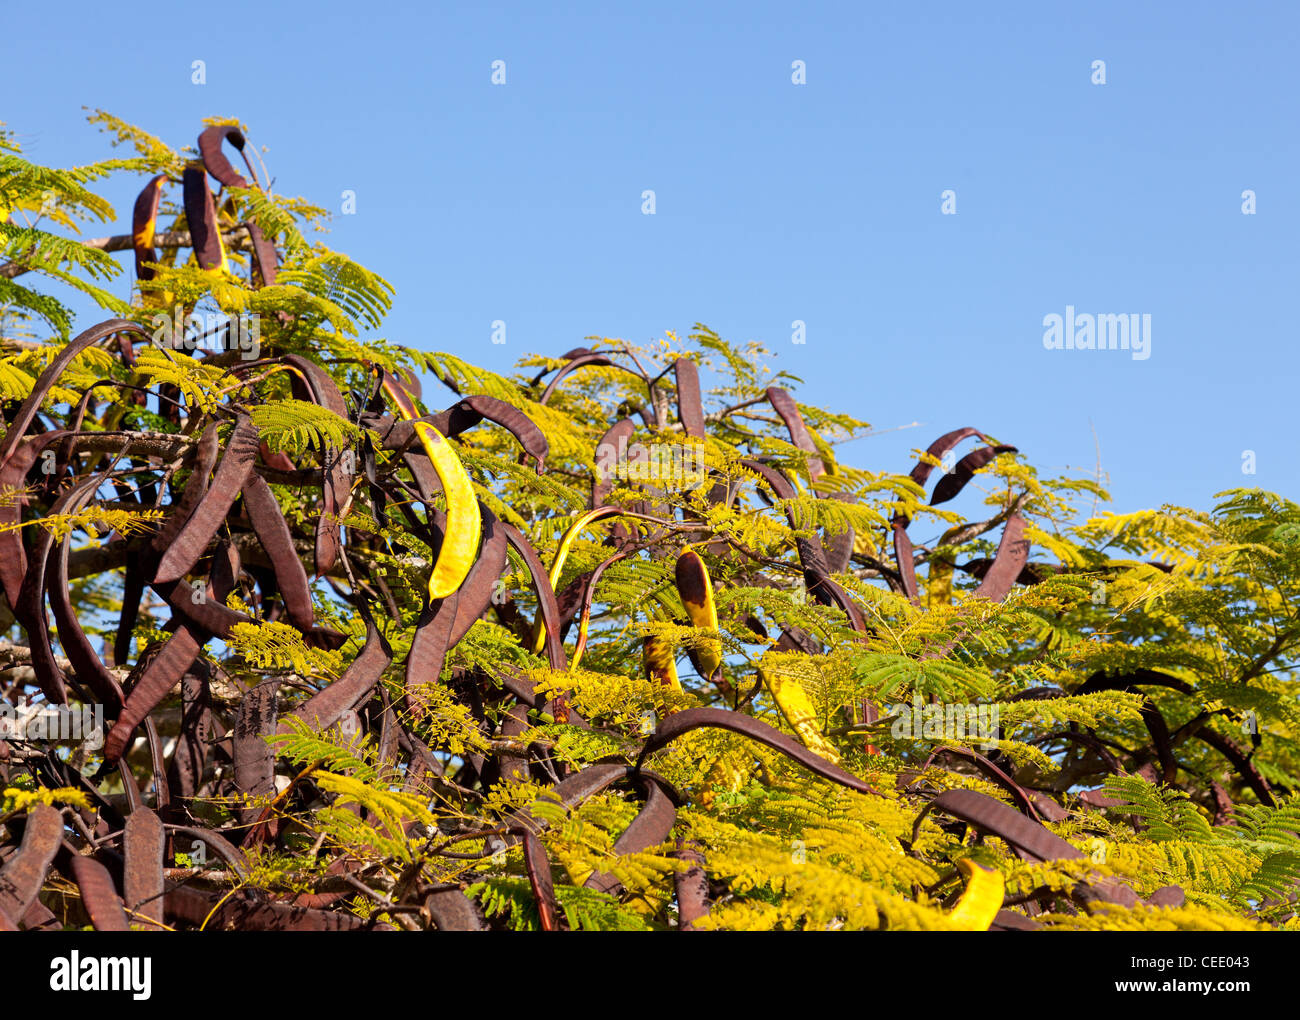 Brown and green seed pods from tamarind tree Stock Photo